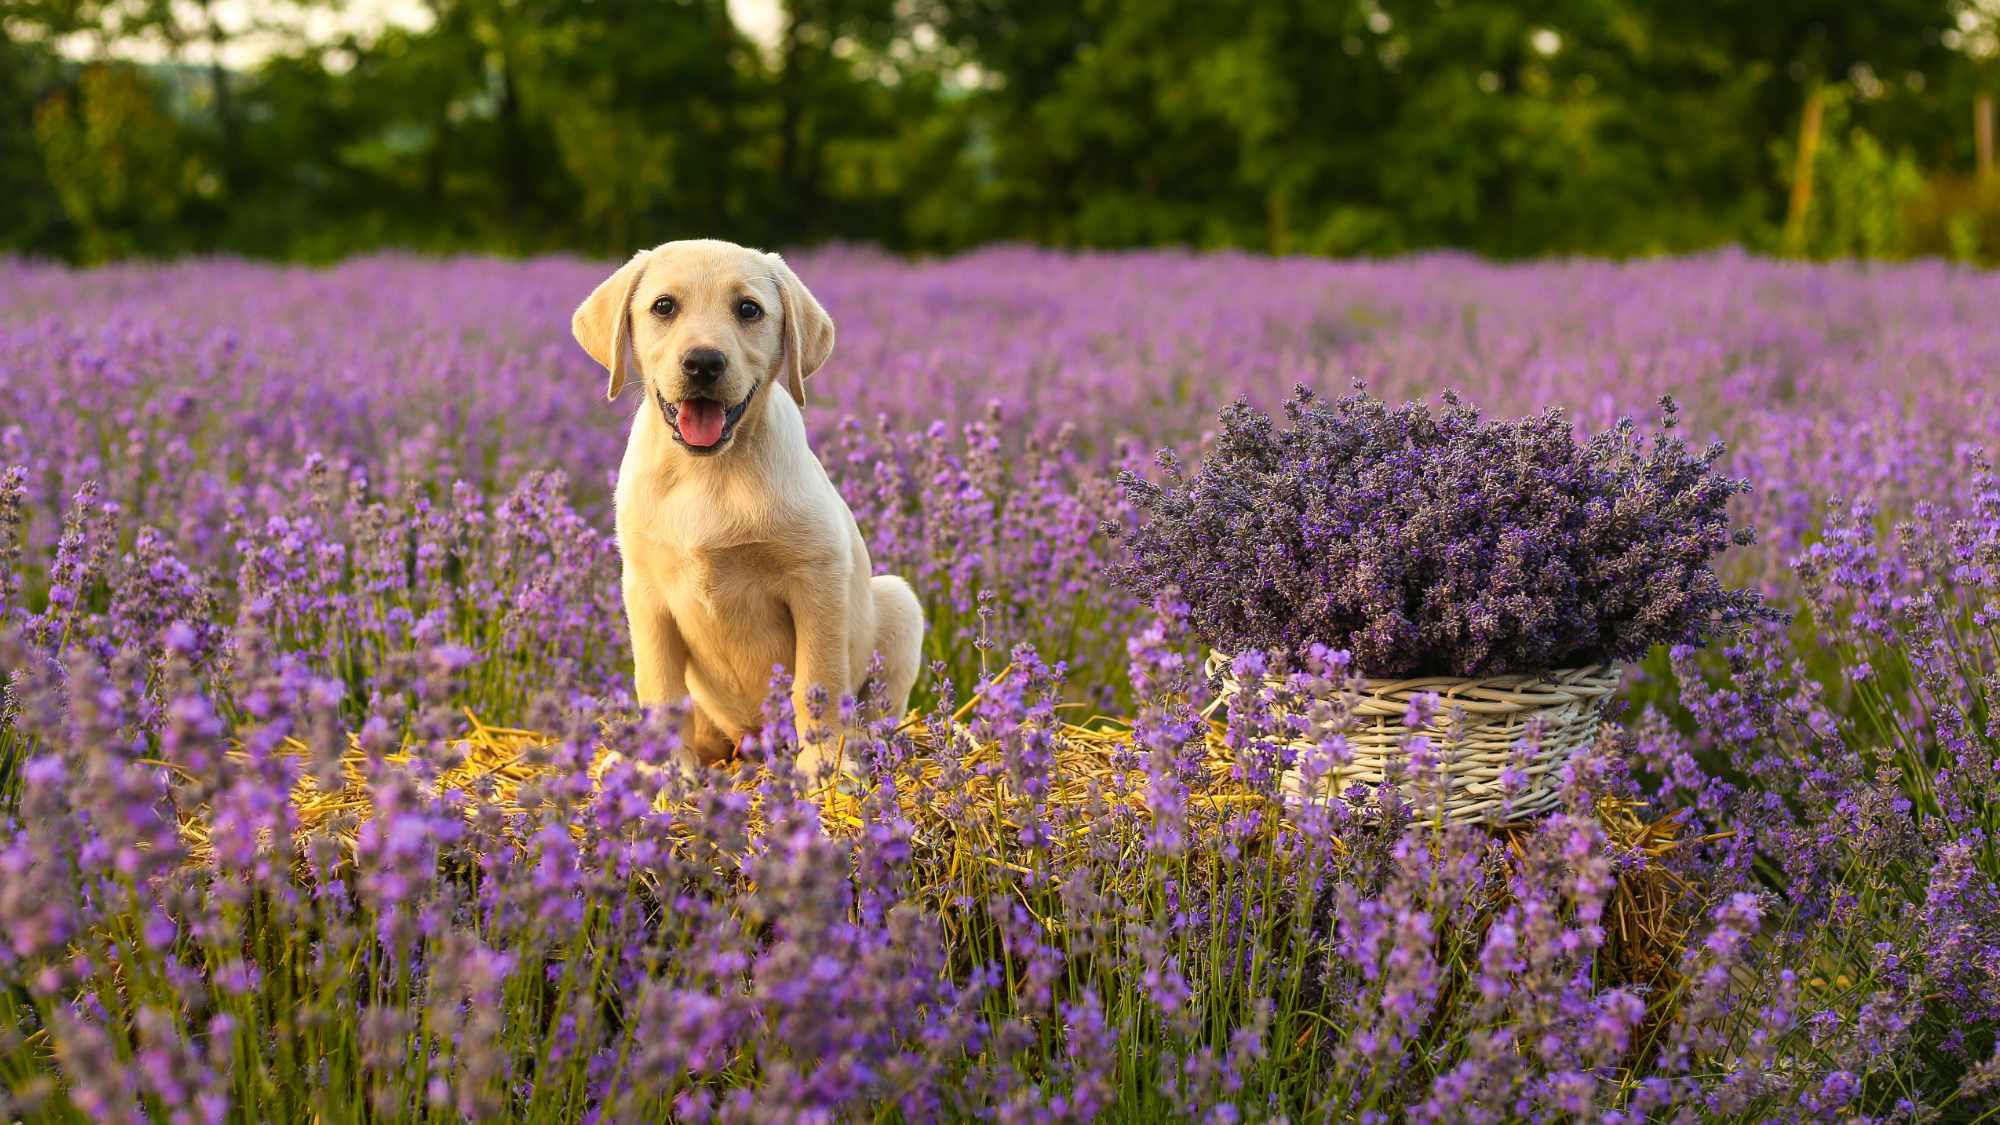 Puppy in a field of lavender